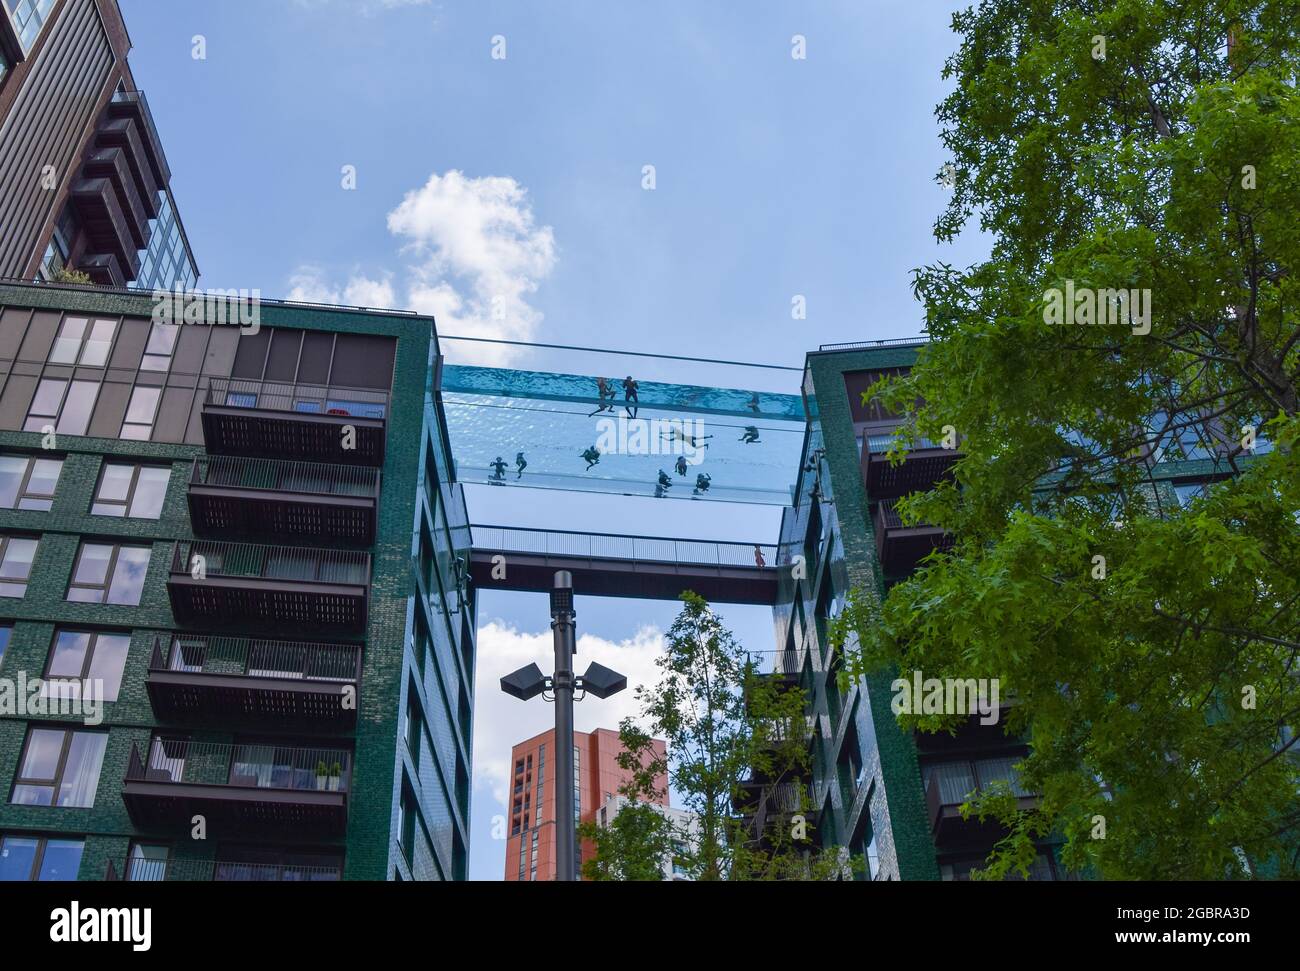 London United Kingdom 5th June 21 People In The Newly Opened Sky Pool A Swimming Pool Suspended 35 Metres Above Ground Between Two Apartment Buildings Next To The Us Embassy In Nine